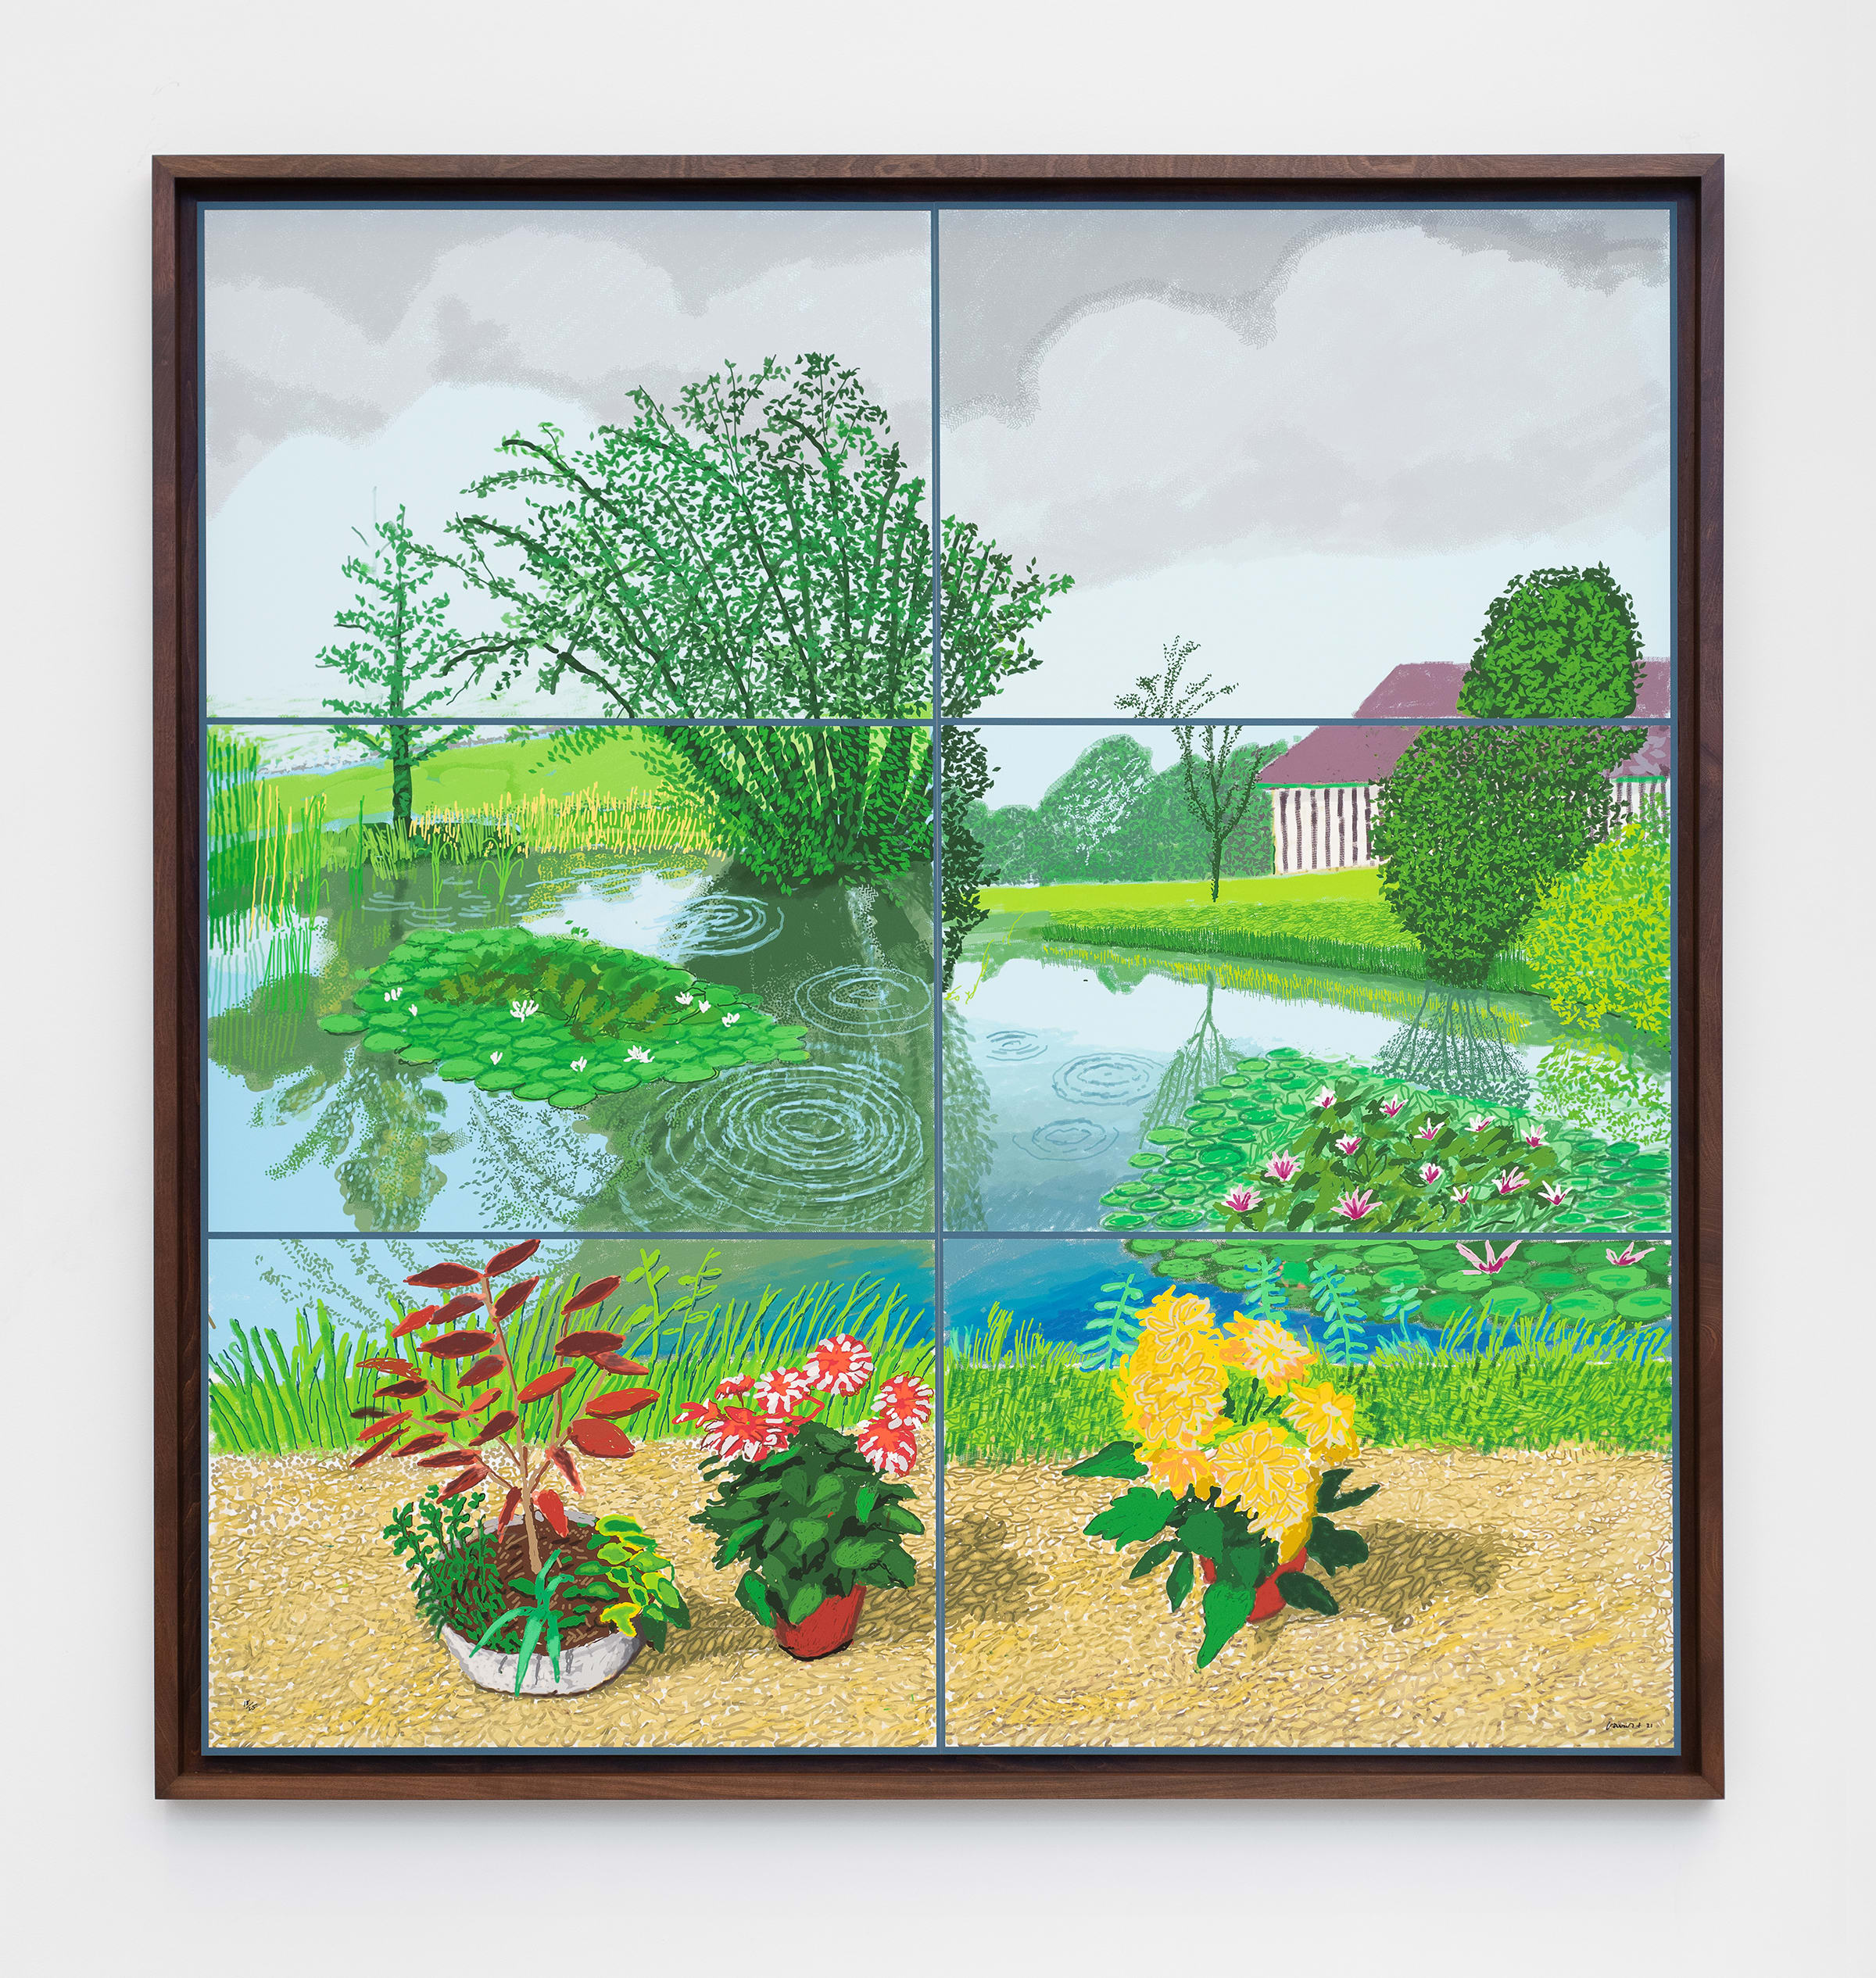 David Hockney, 10th–22nd June 2021, Water Lilies in the Pond with Pots of Flowers, 8th–22nd June 2021, 2021. © David Hockney.